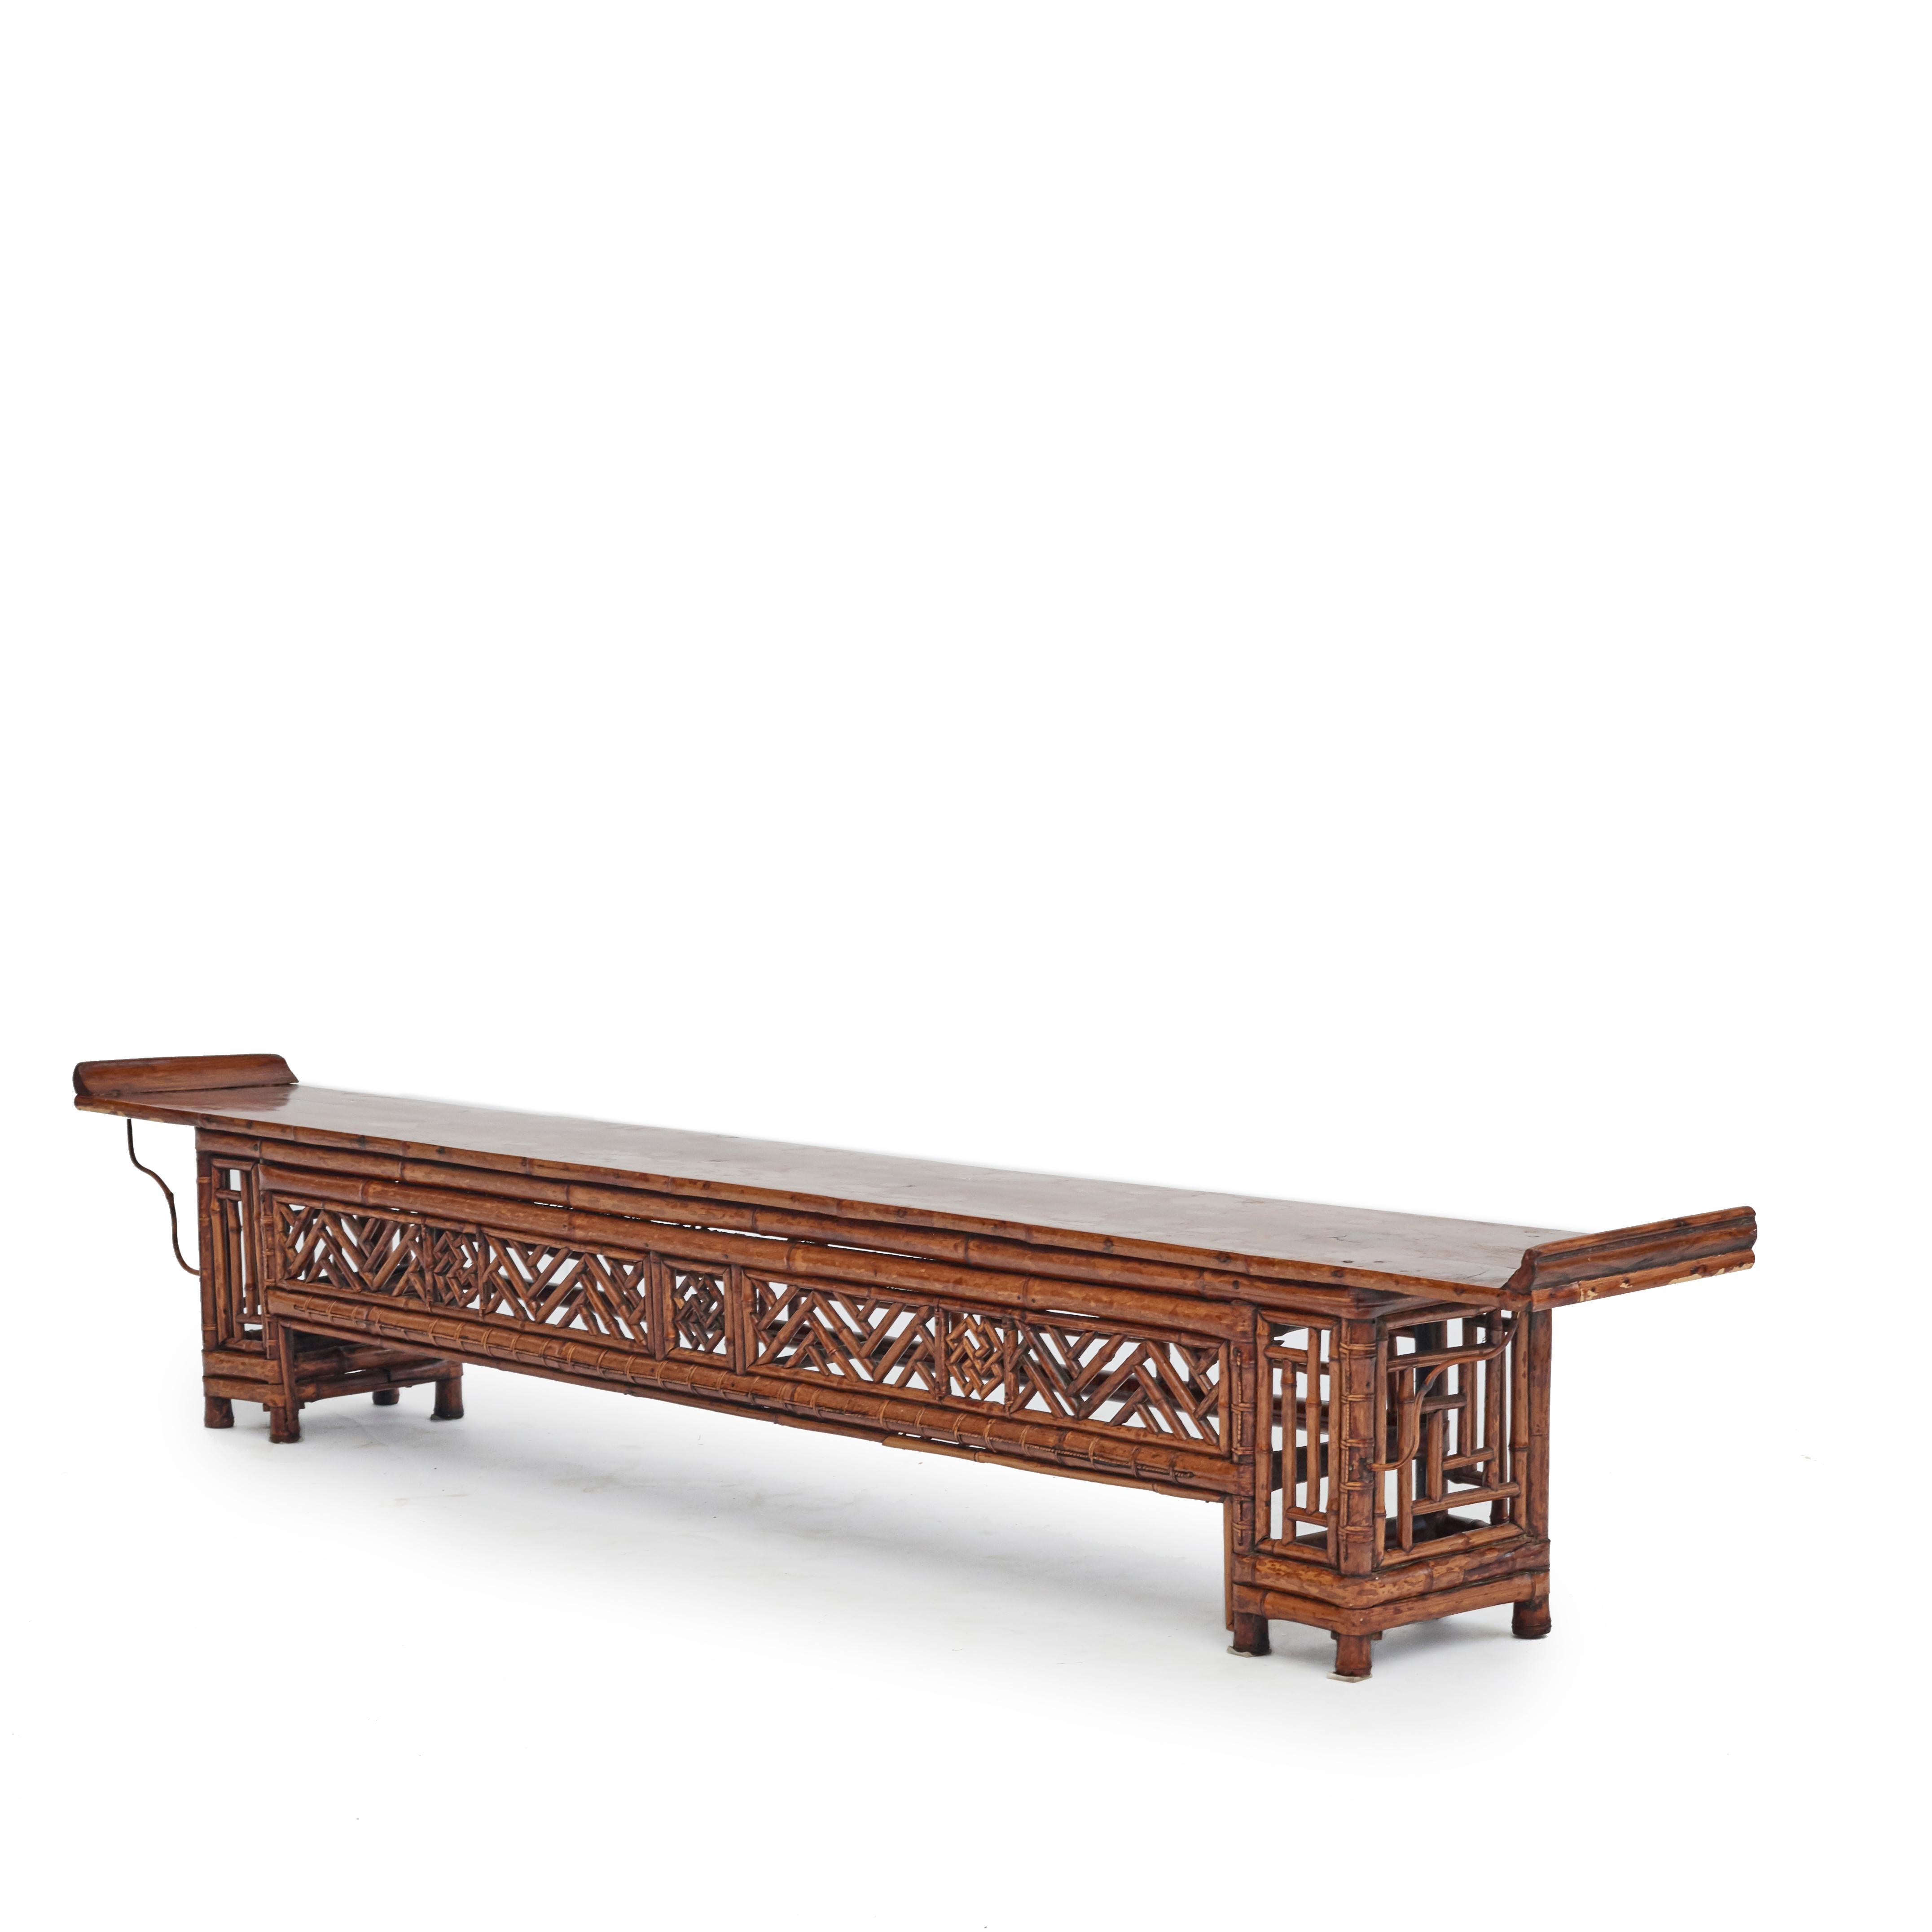 Low qing style console table made of bamboo, table top of elm wood.
Apron and legs with a decor of geometrical Chinese openwork motifs.

Natural age-related beautiful patina.
China, 1840-1860.

Measure : H: 32,5 / 35 cm